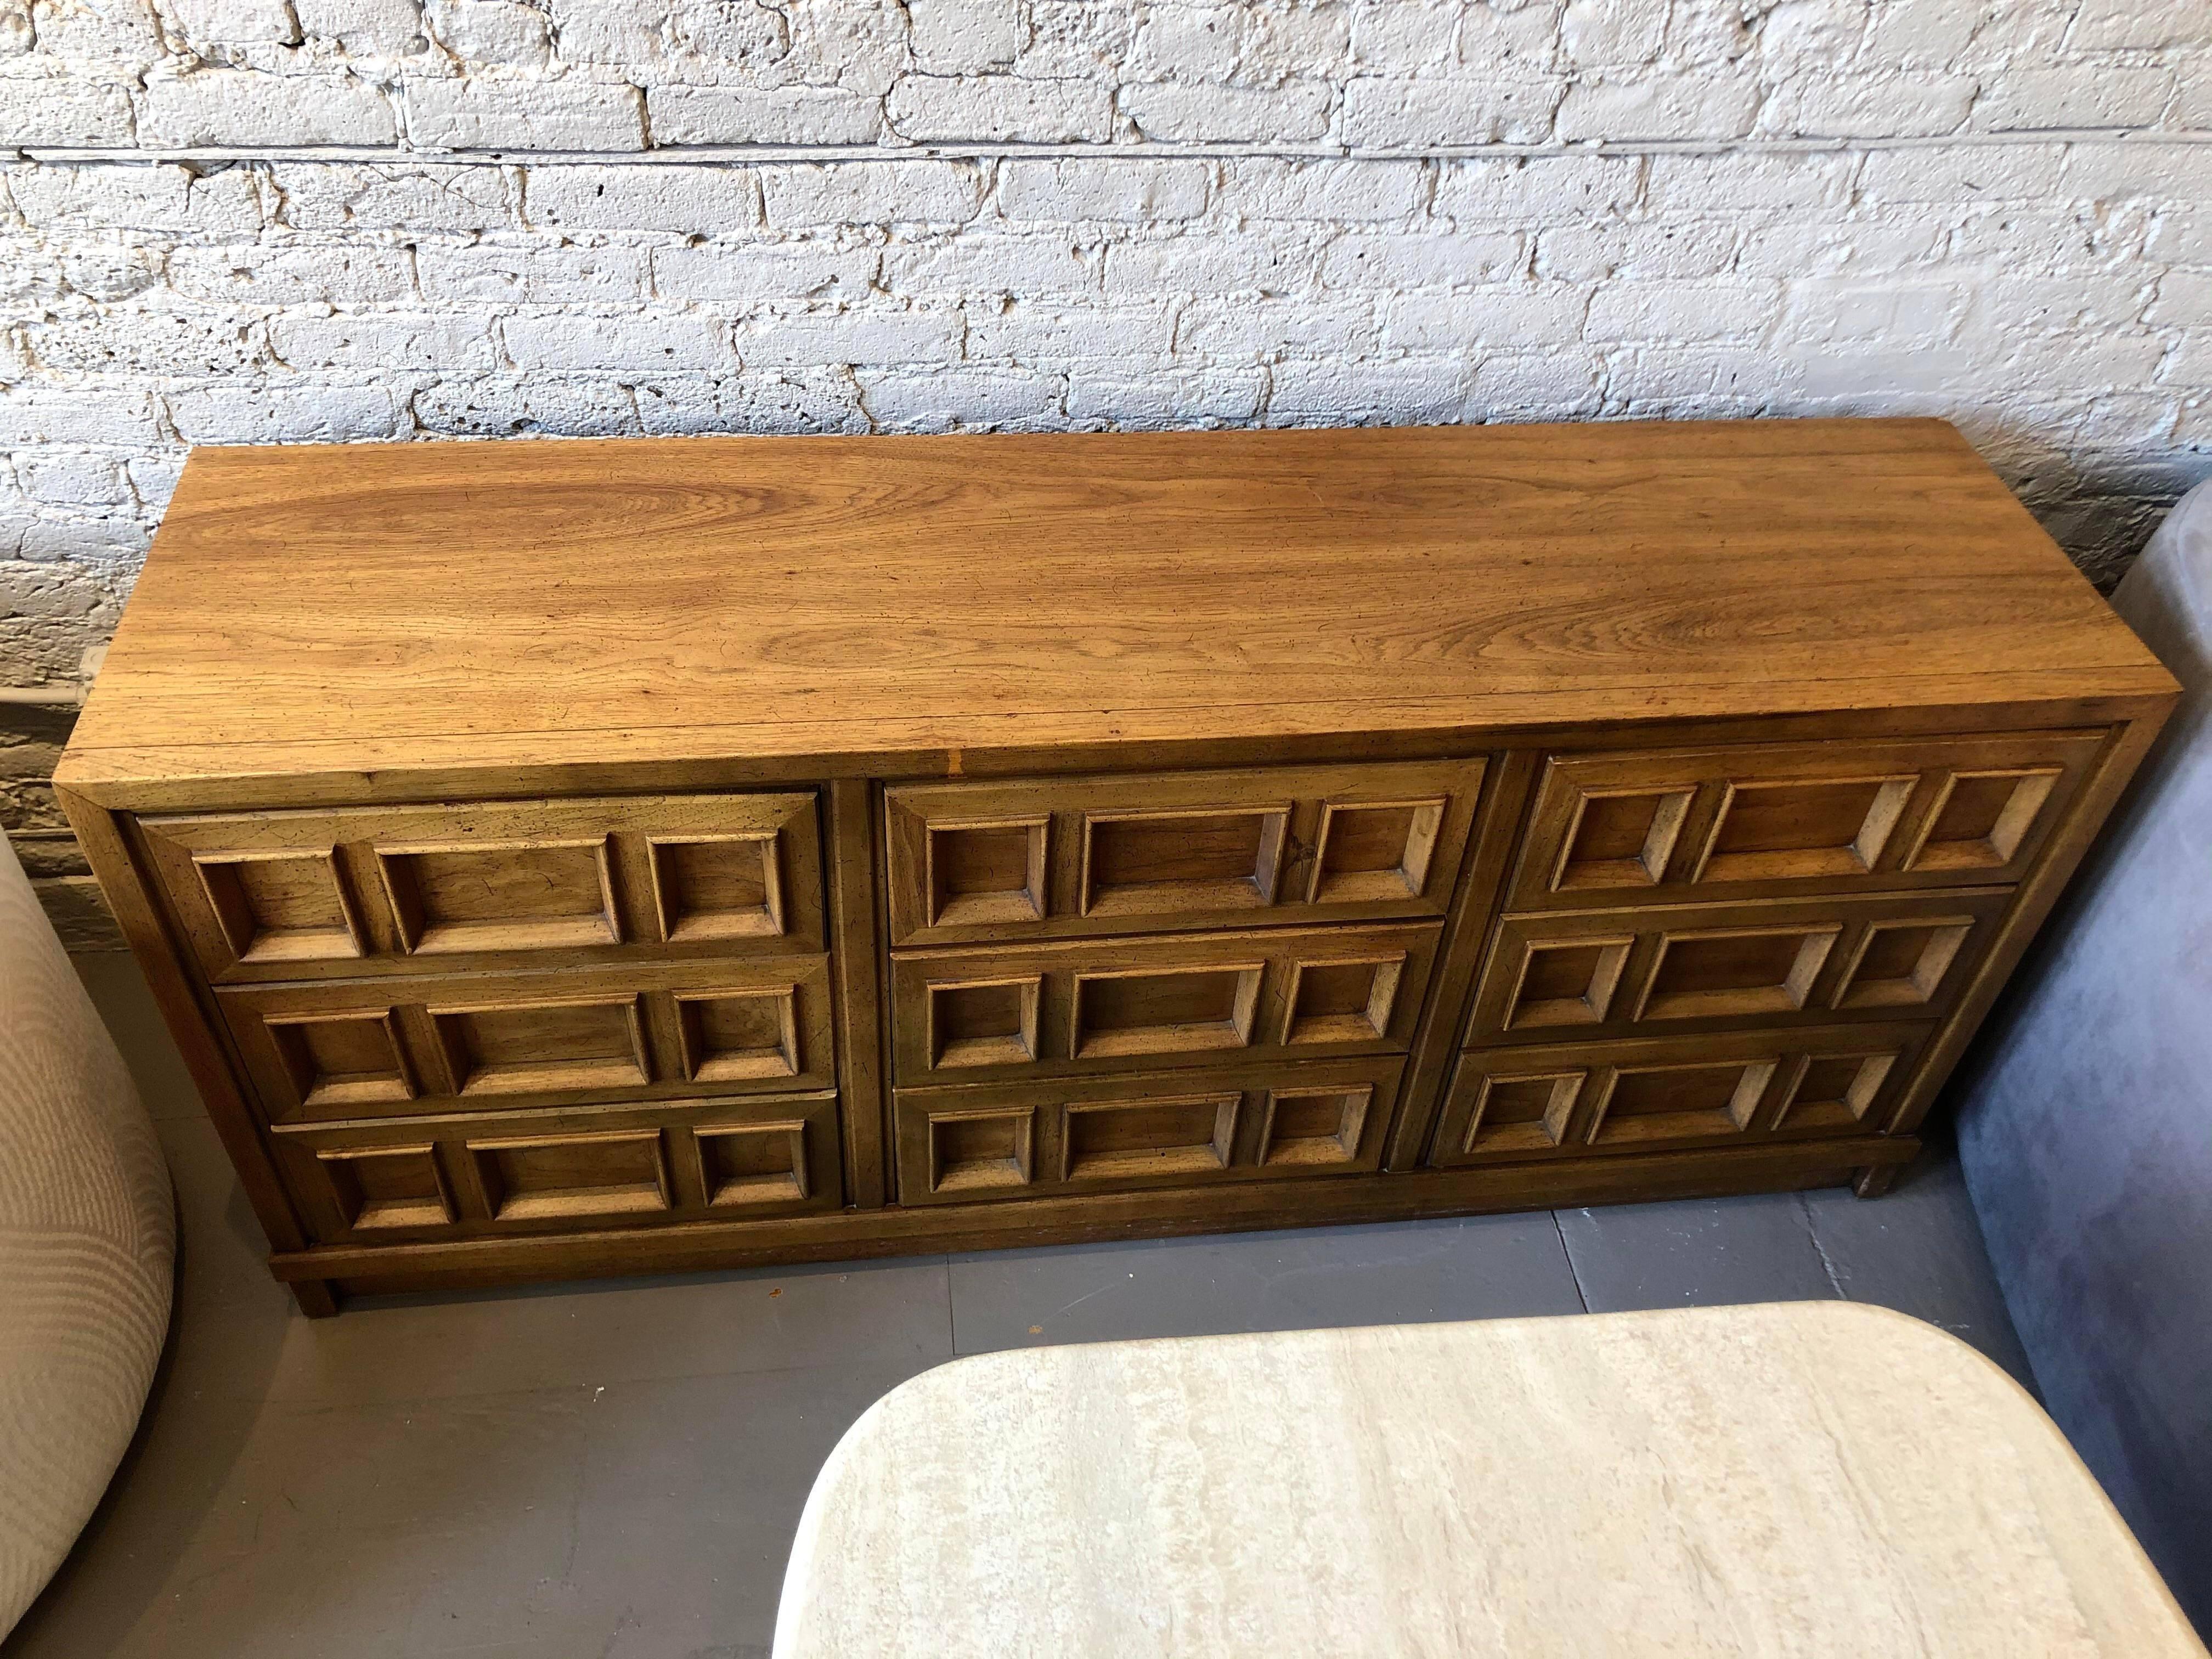 Super cool modern design on this vintage dresser. The front and drawers are solid wood, tops and sides are veneer. Can be used as it or restored. 

Dimensions: 72